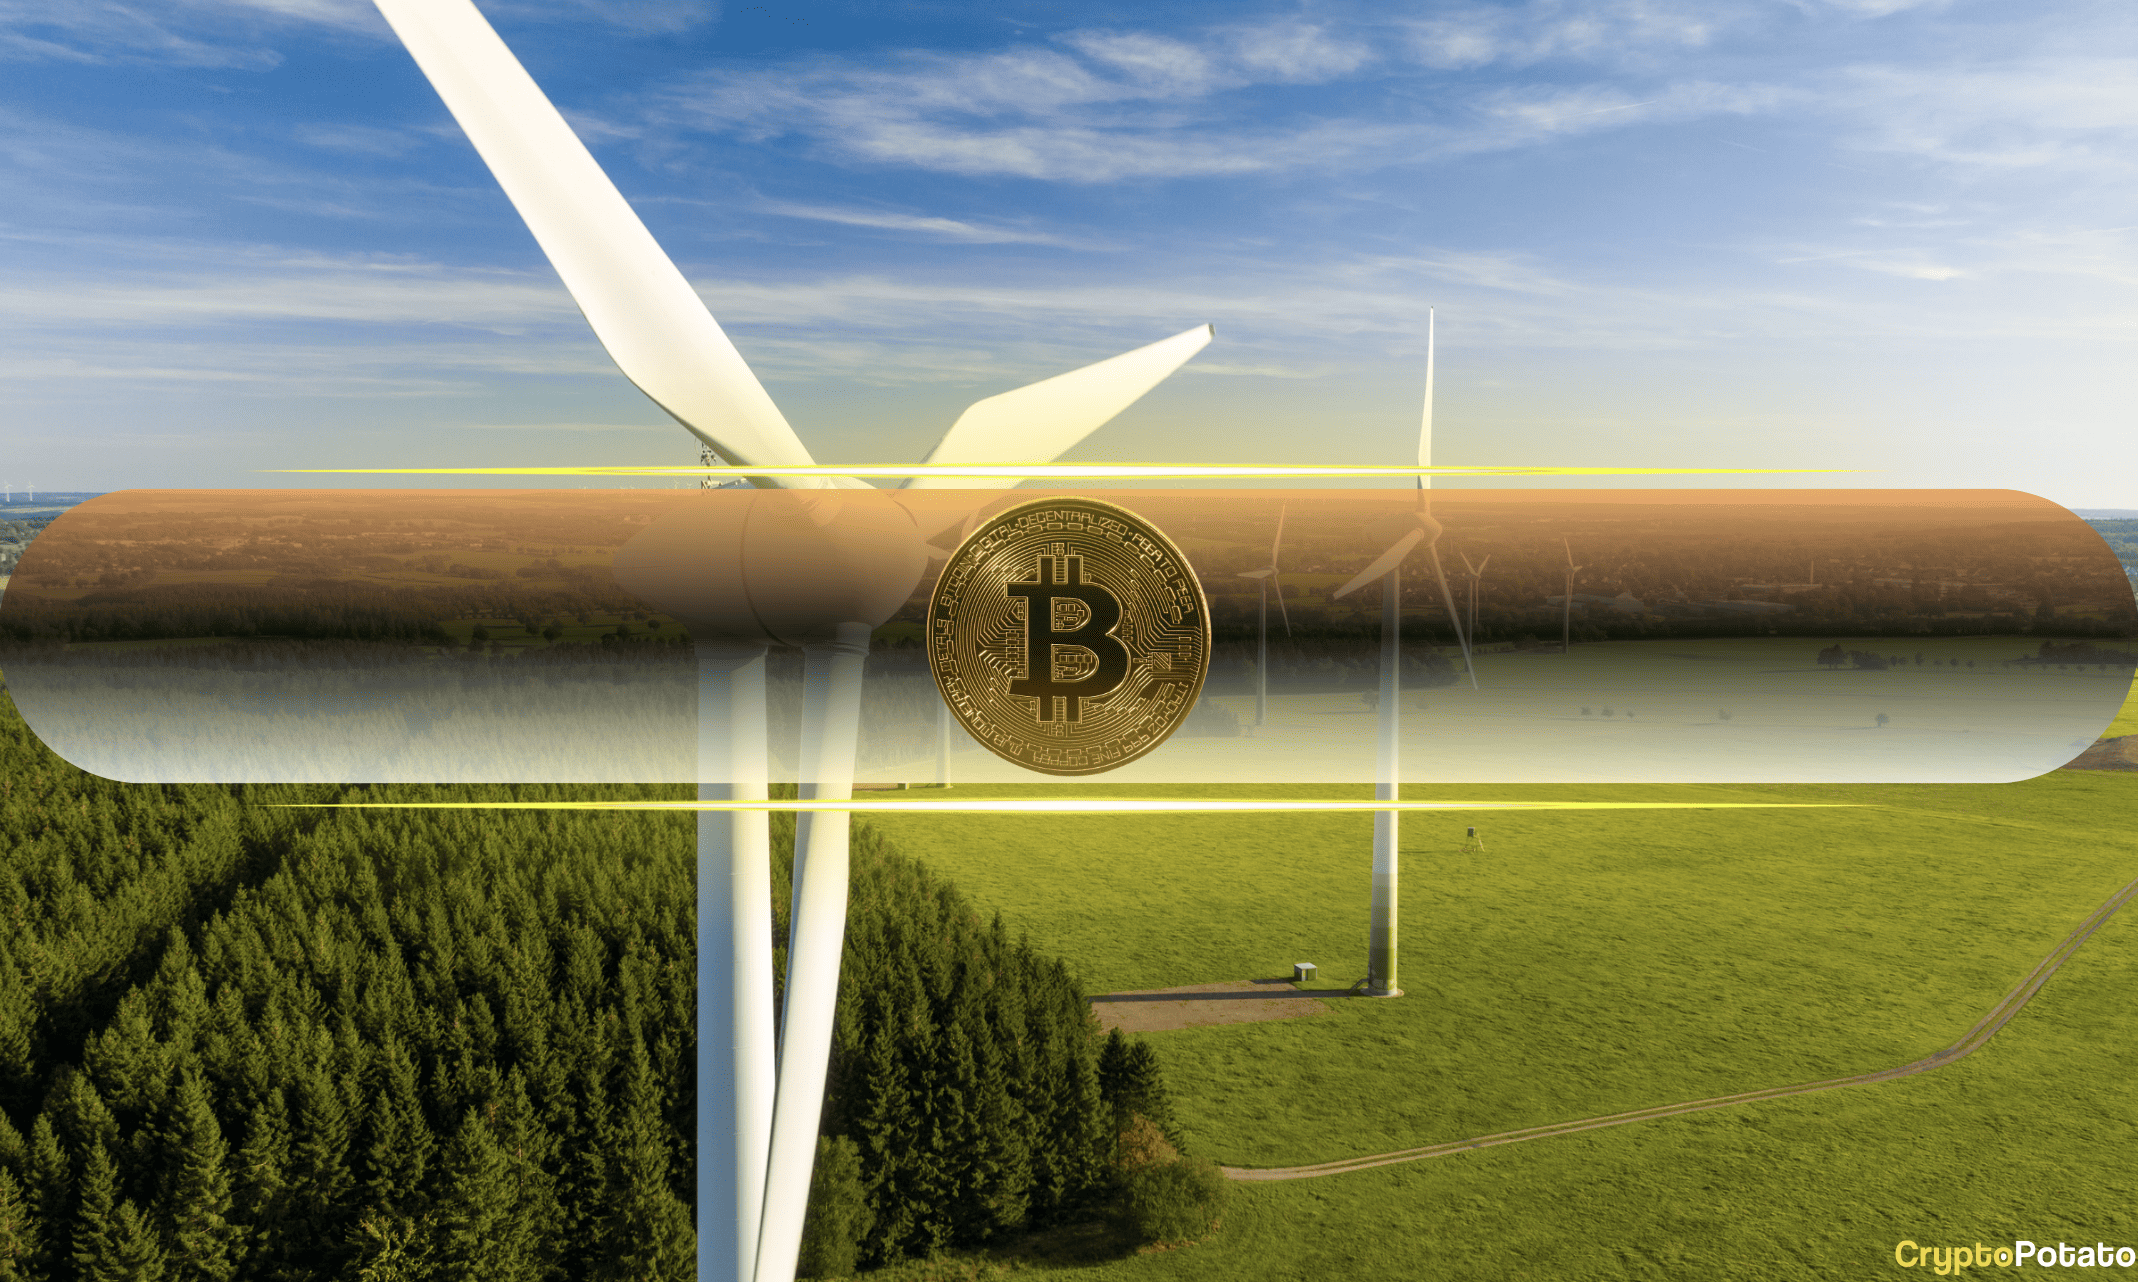 How-bitcoin-mining-could-actually-make-the-earth-greener-(opinion)